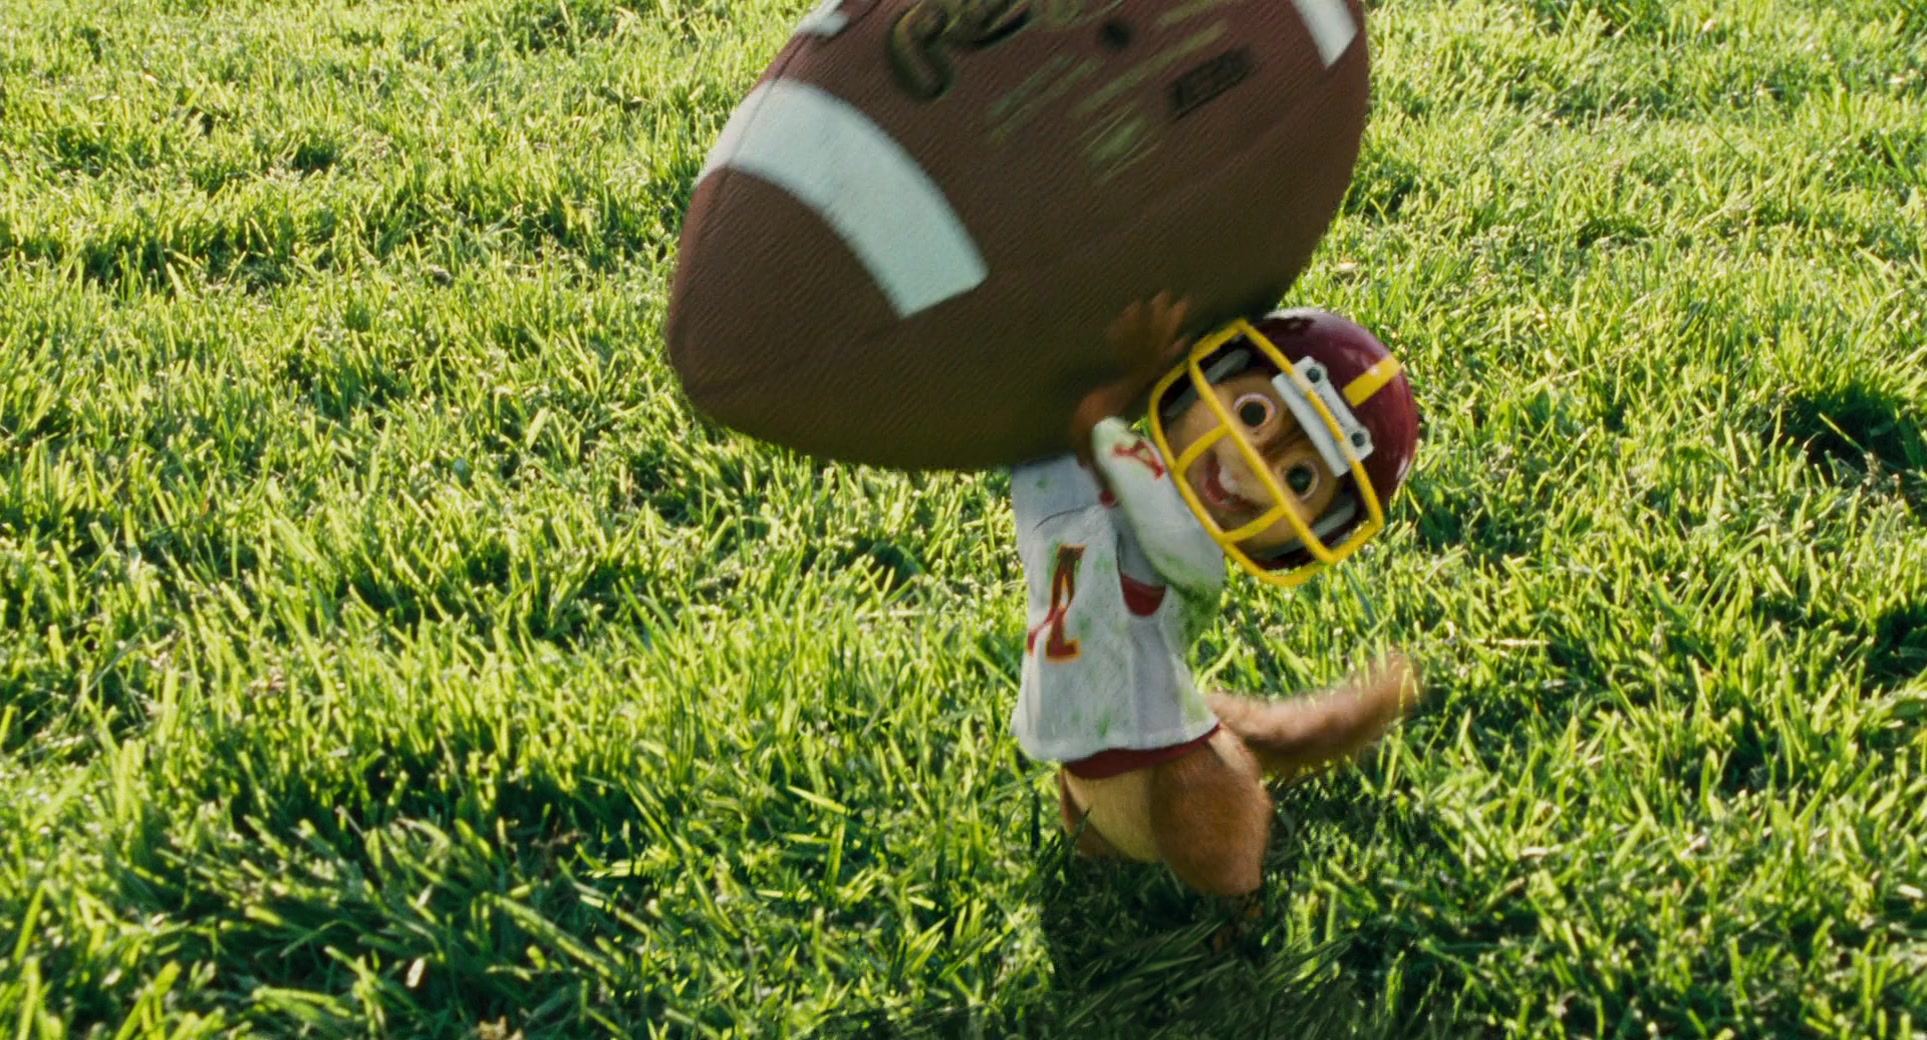 Rawlings Football in Alvin and the Chipmunks: The Squeakquel (2009) Movie